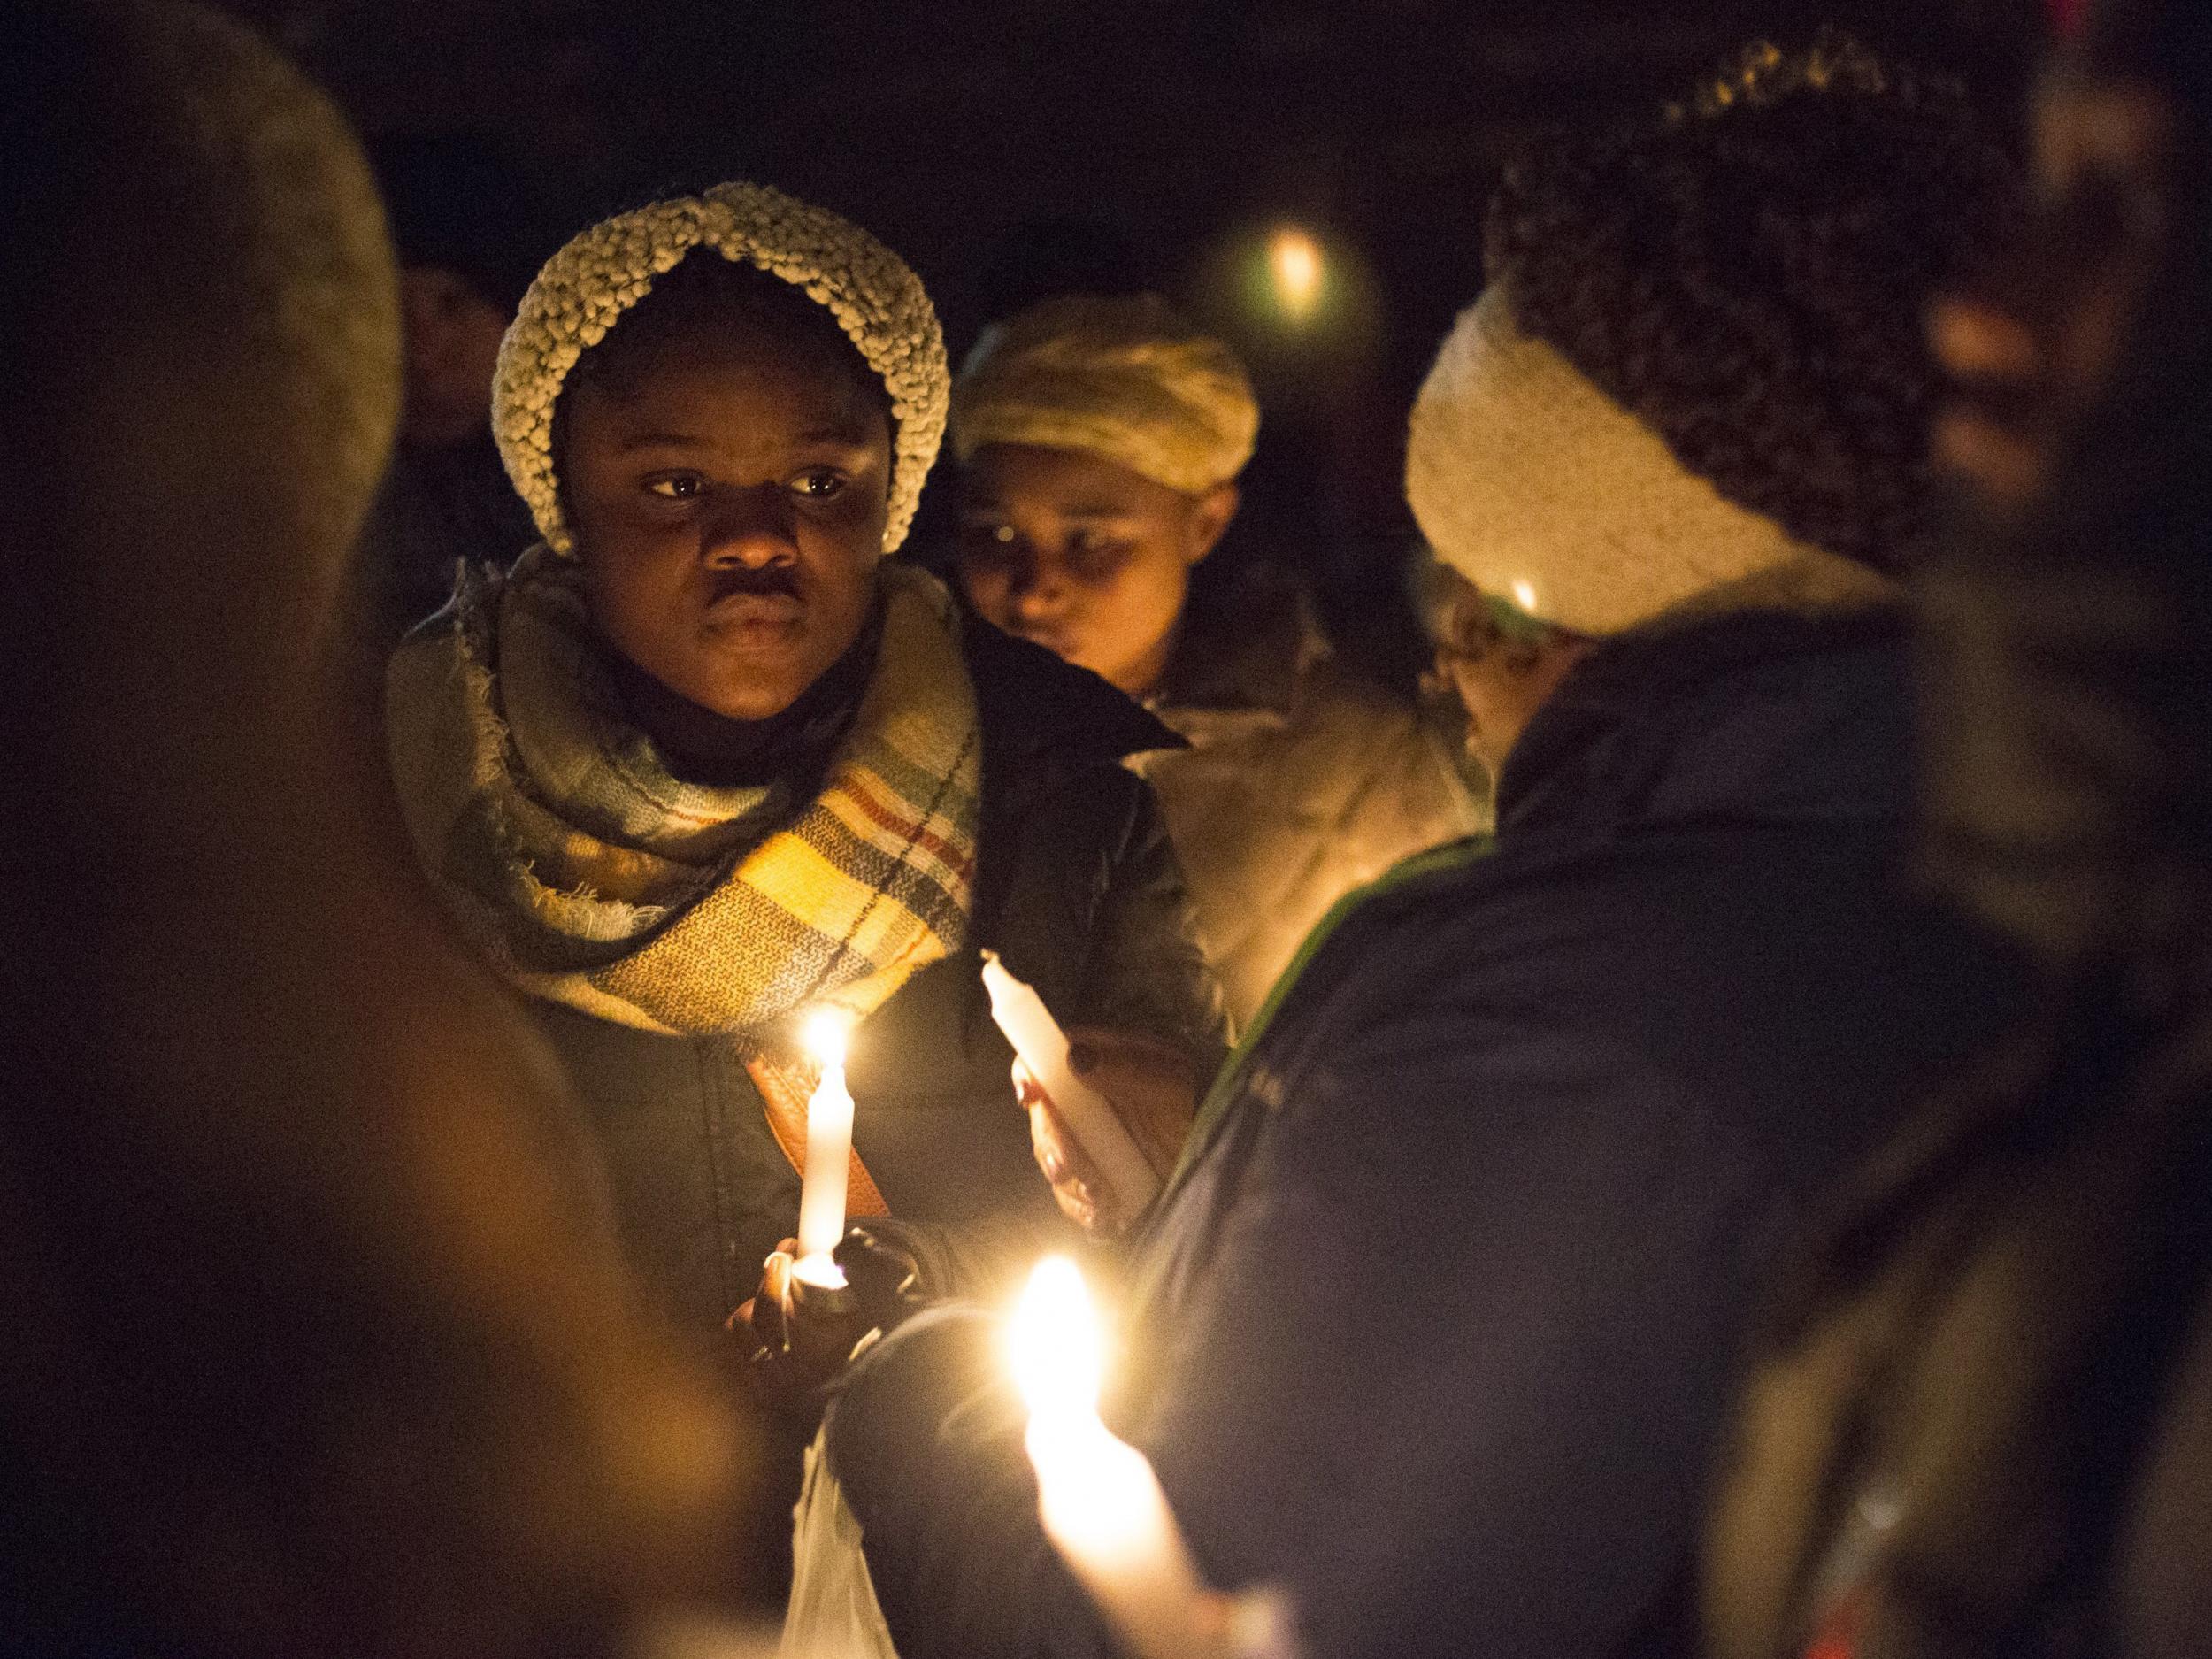 A candlelit vigil held for missing Mujey Dumbuya held on 1 February